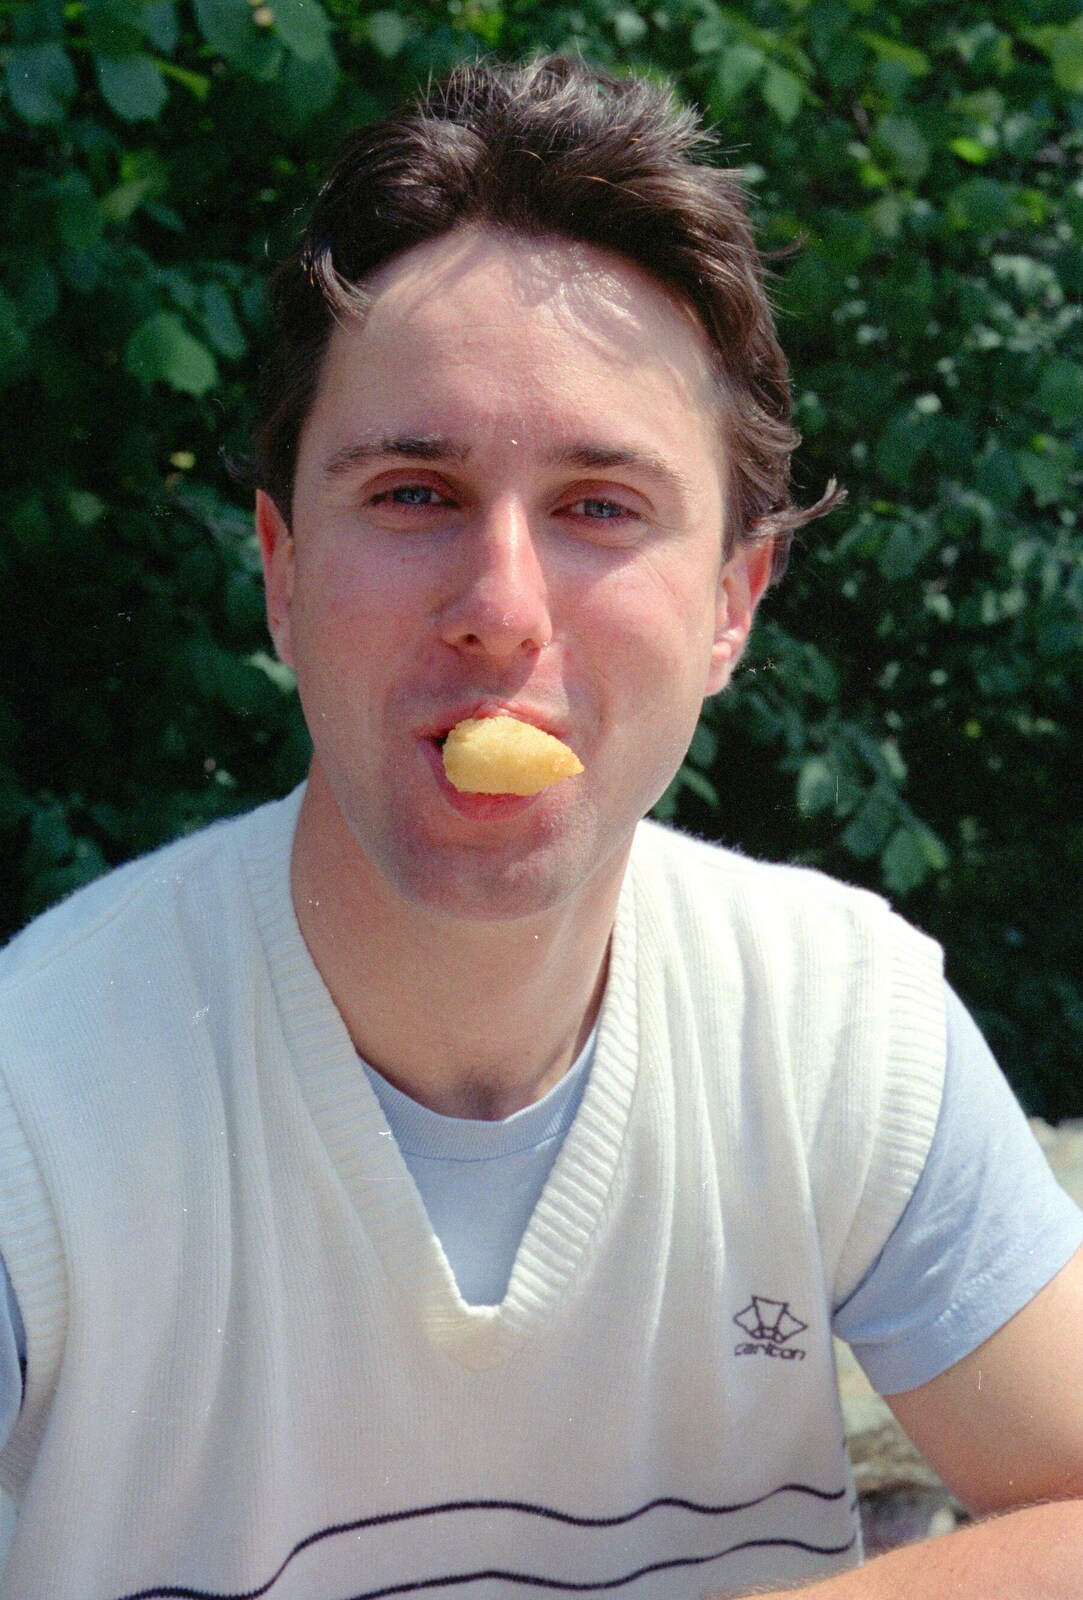 Riki with a piece of scampi in his mouth from Uni: A Burrator Bike Ride, Dartmoor - 20th June 1989